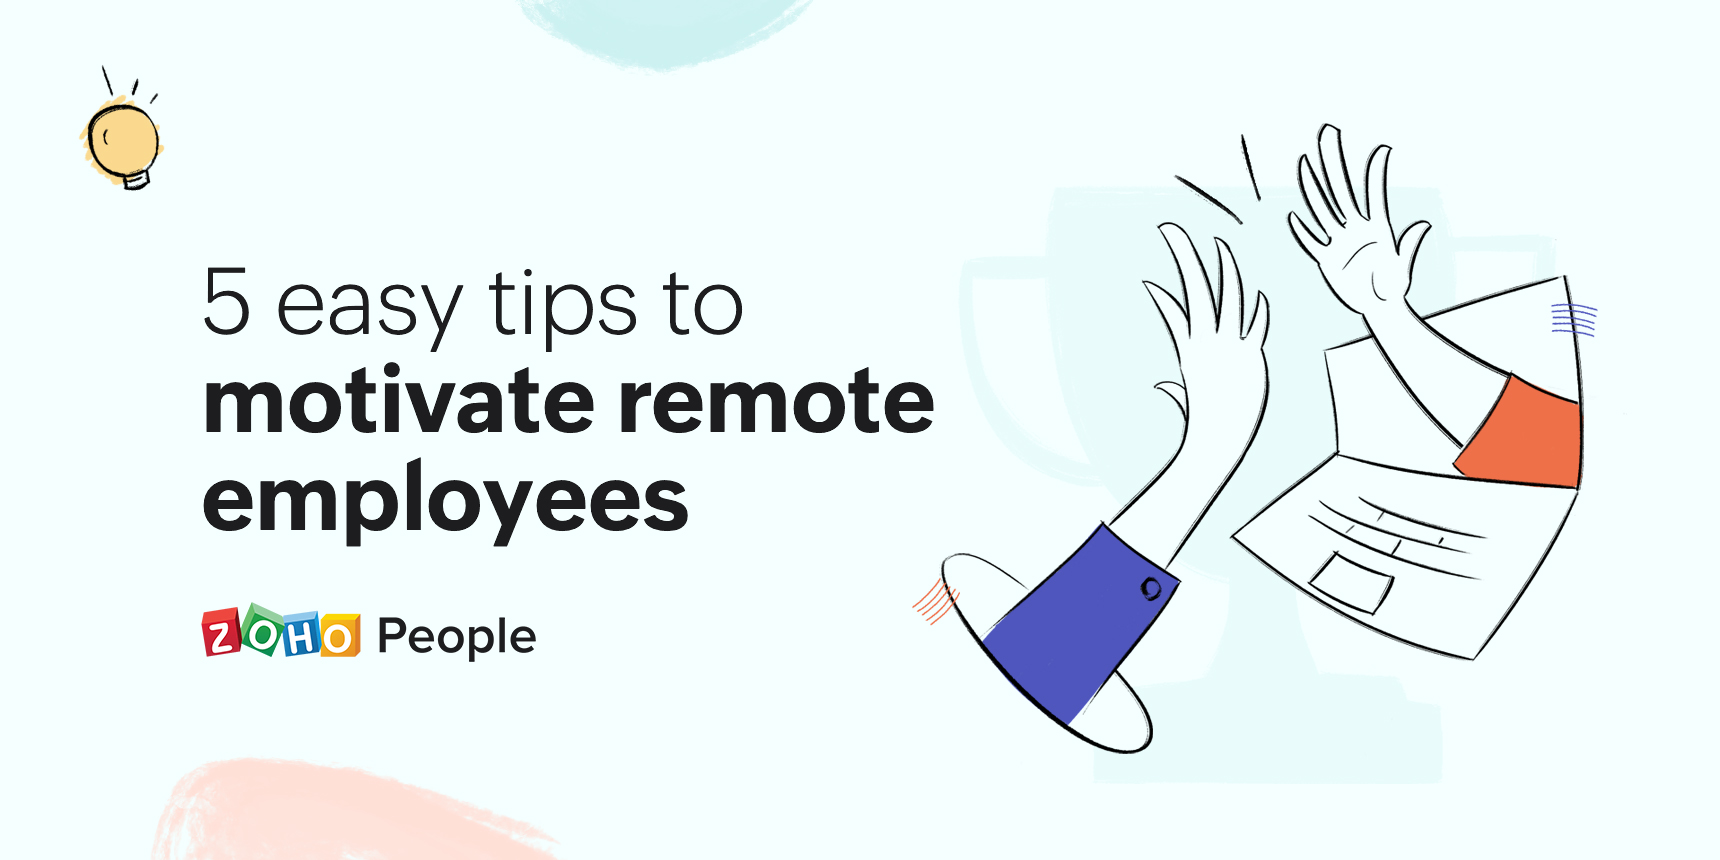 Tips to motivate Remote Employees